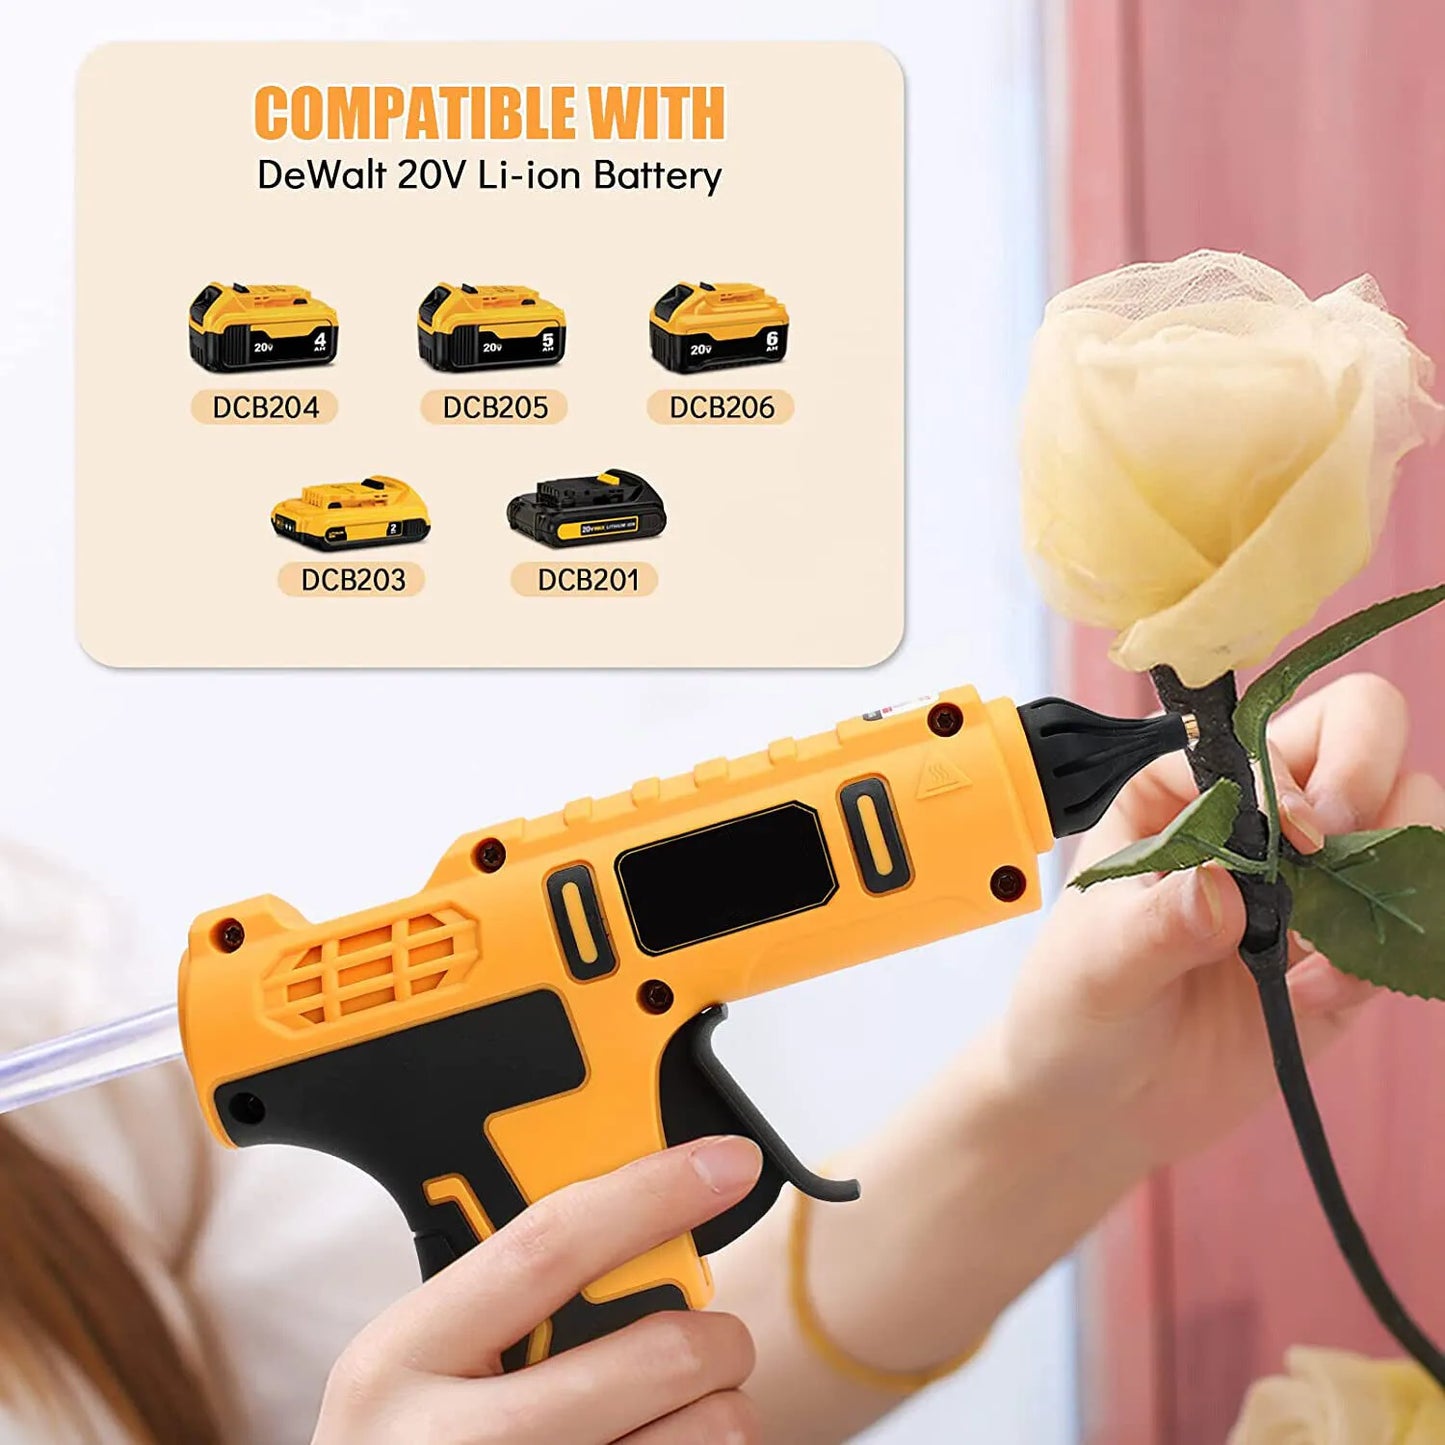 Versatile Cordless Electric Handheld Glue Gun Kit with Anti-Scald Nozzle and 12 Sticks for Dewalt - Your Ultimate Repair and DIY Companion